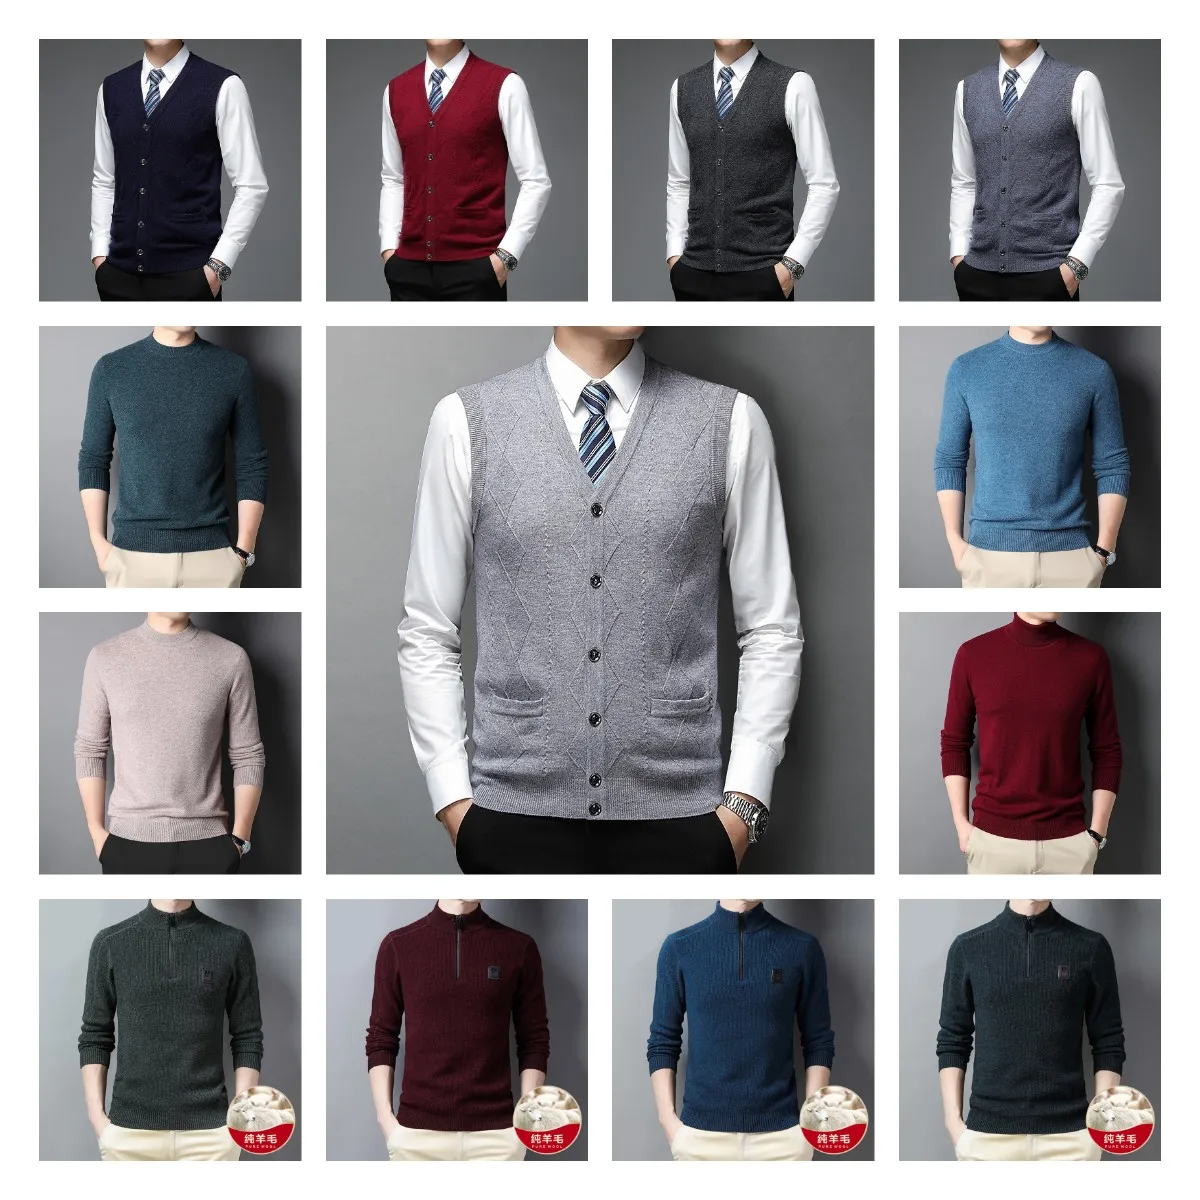 Men's Sweater Round,Medium And Thick New Middle-aged And Young Men's ...